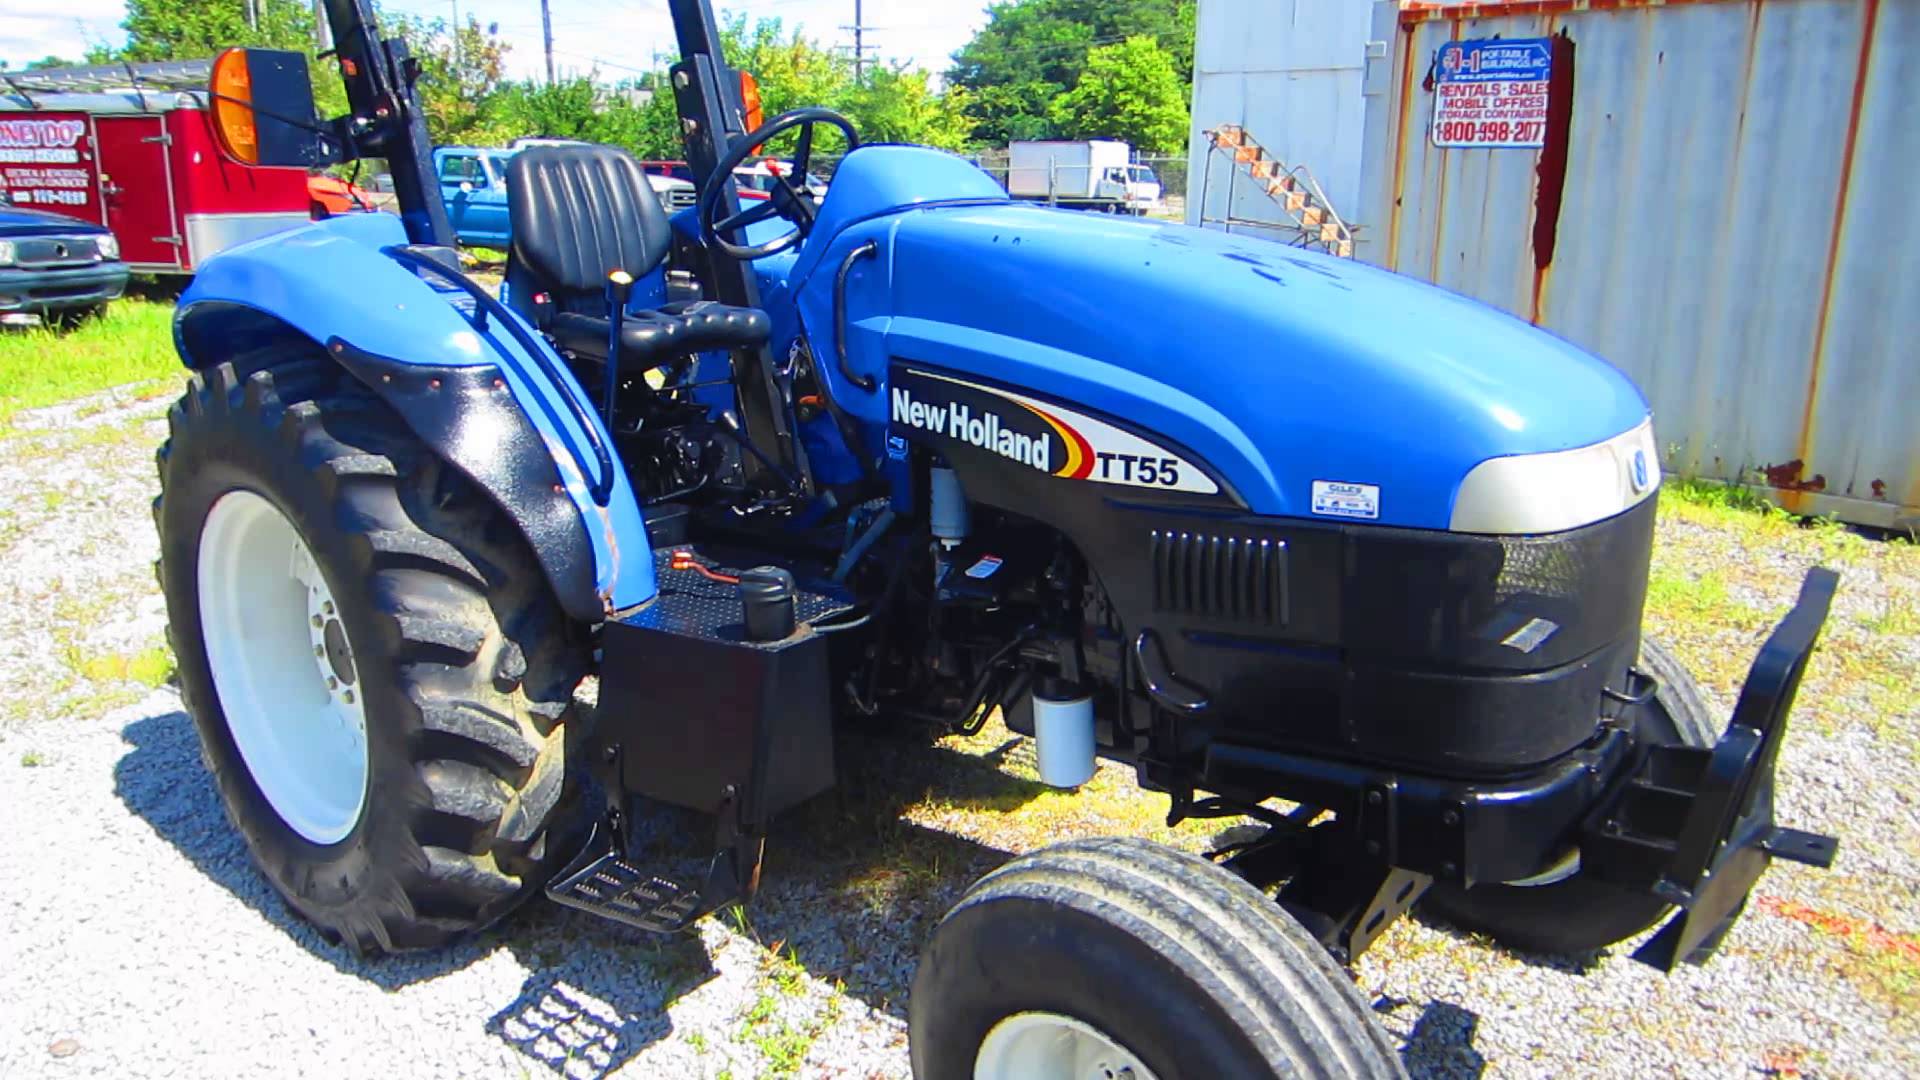 2005 NEW HOLLAND TT55 2.9L 3 Cyl. Diesel Agricultural Tractor ...